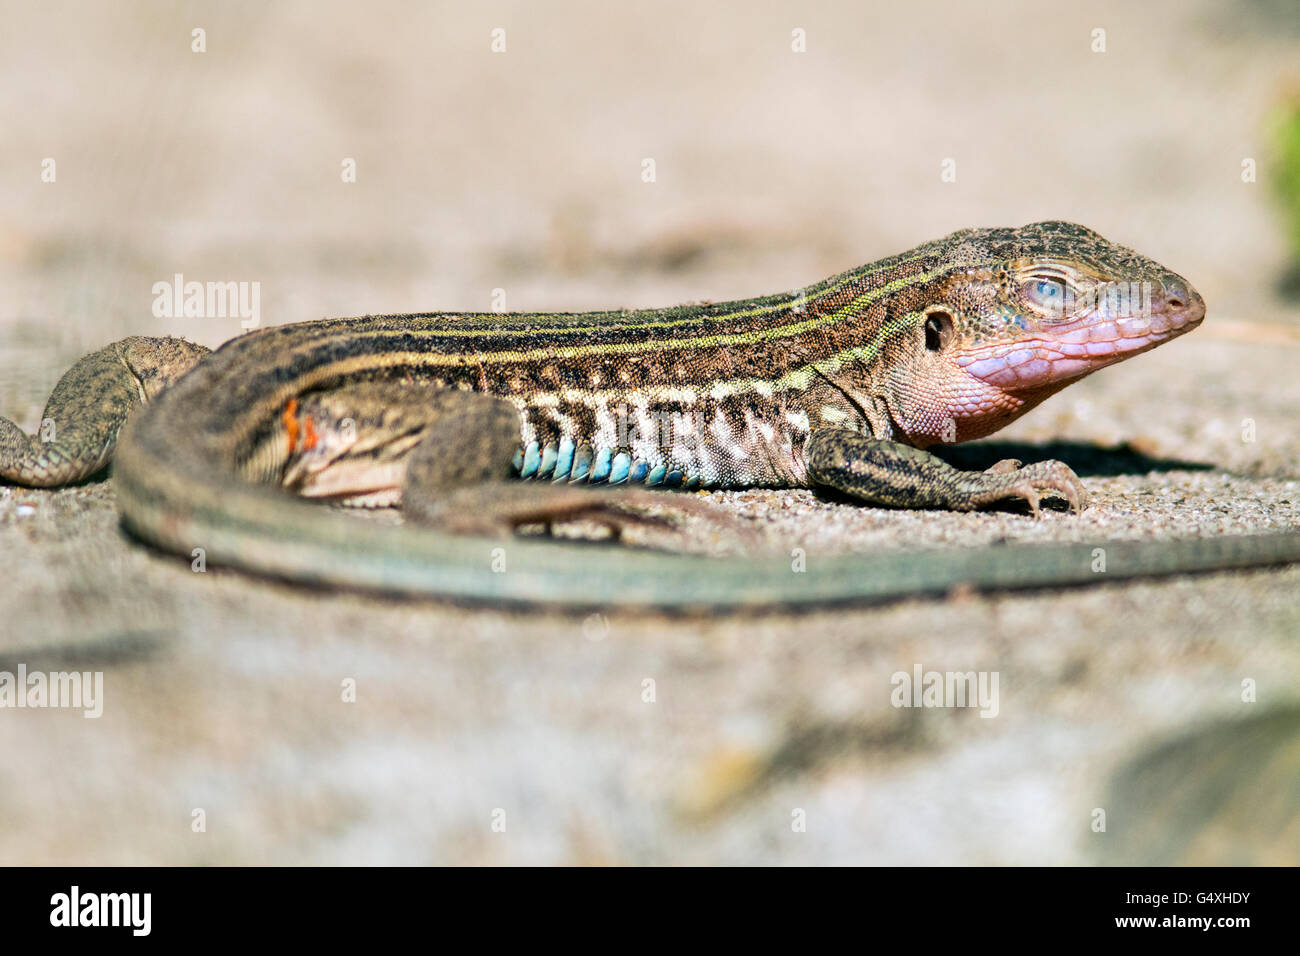 Texas Spotted Whiptail Lizard mostra nictitating membrana - Camp Lula Sams - Brownsville, Texas USA Foto Stock